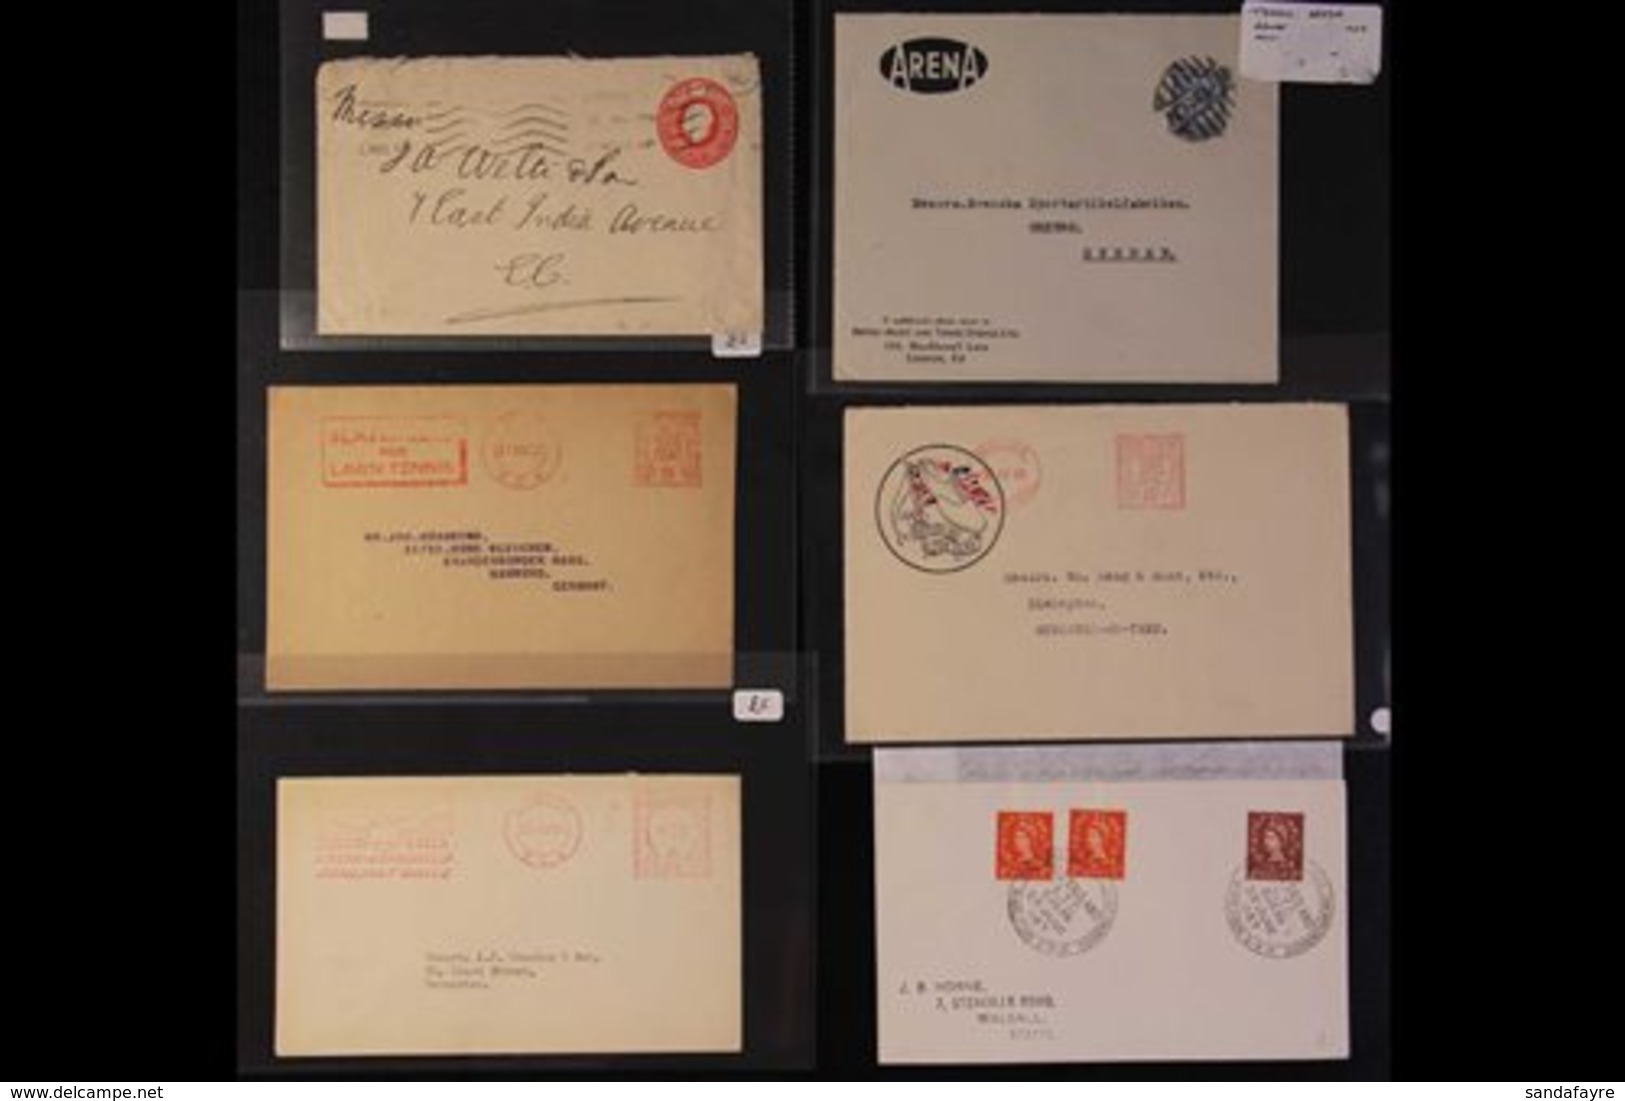 TENNIS ADVERTISING ENVELOPES & CANCELLATIONS All Related To Tennis, We See 1920s "Arena" Who Manufactured Tennis & Badmi - Unclassified